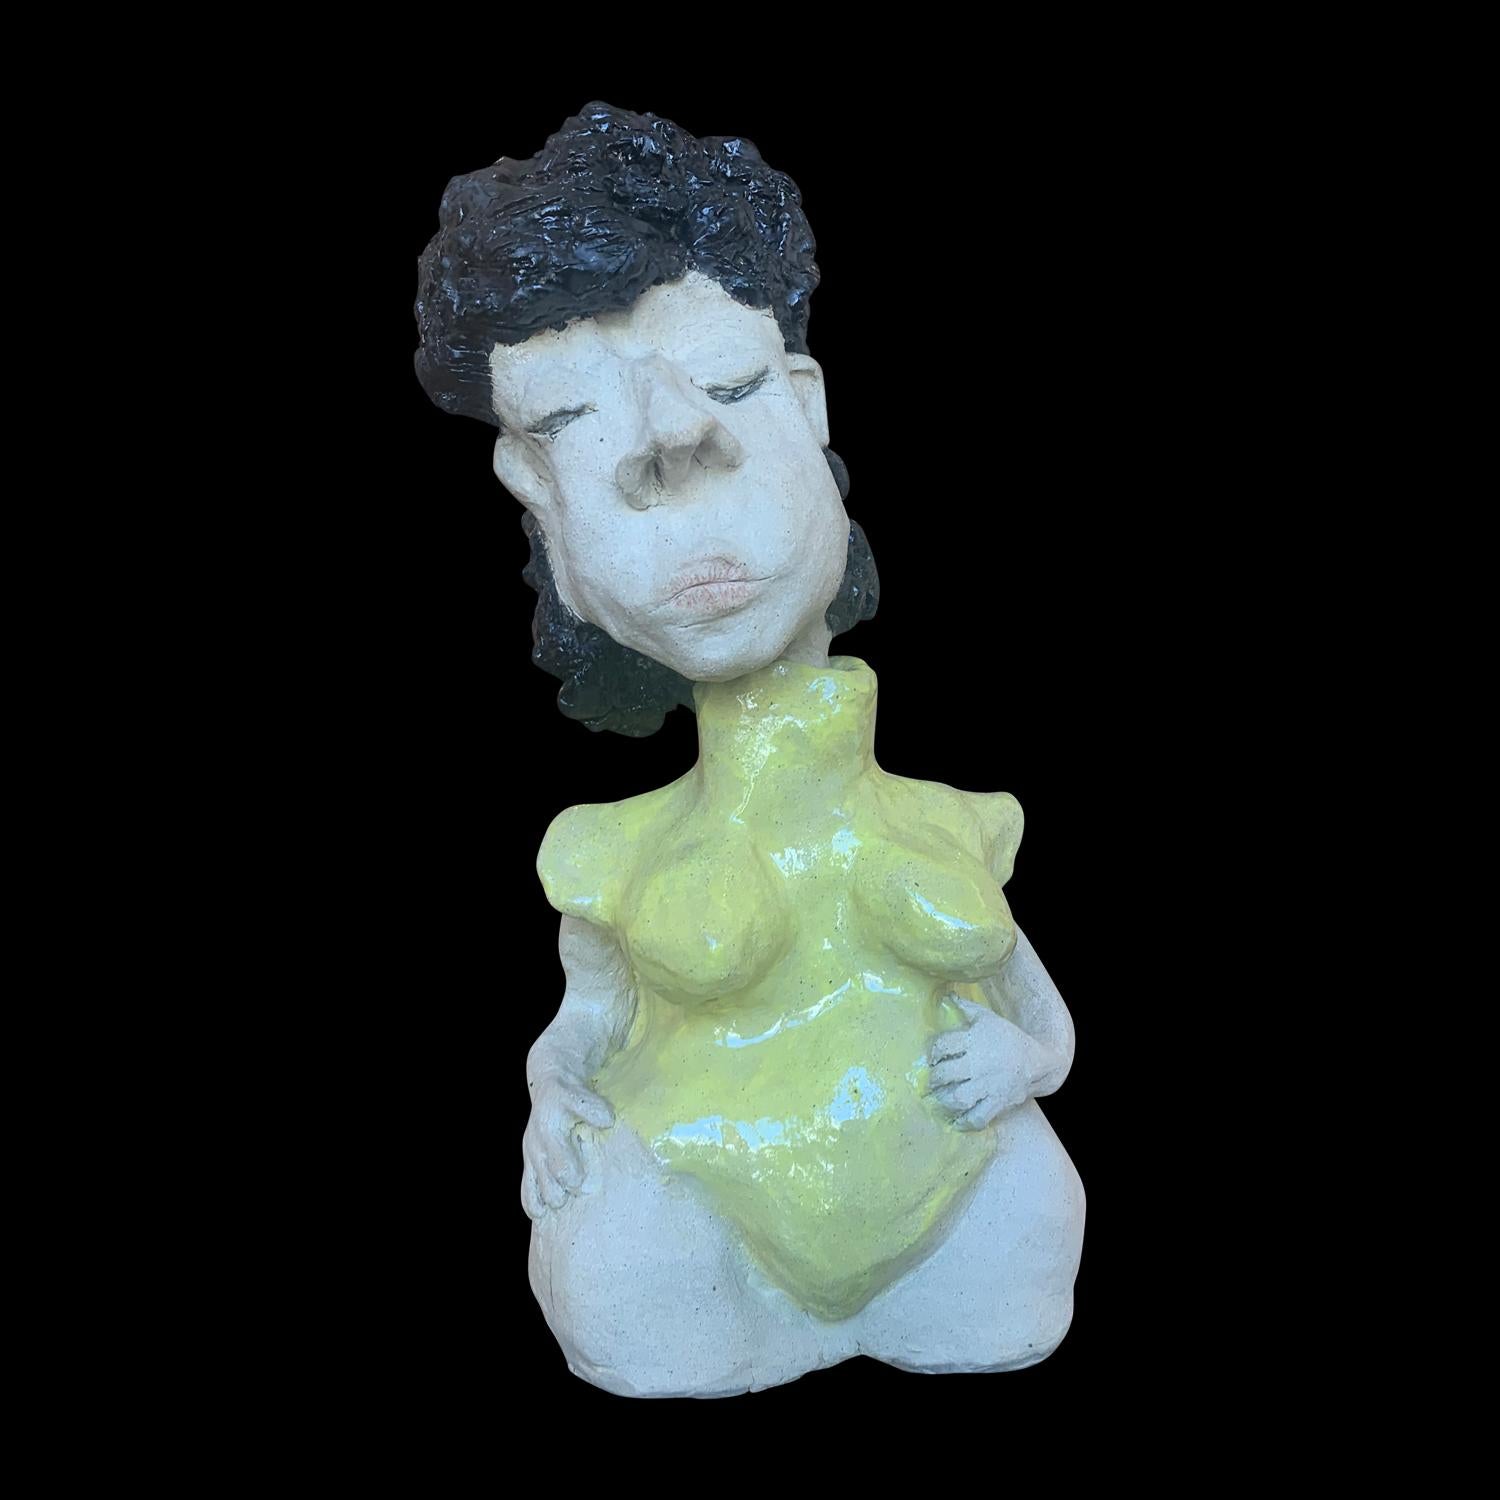 Adi Rom Figurative Sculpture - A Woman With Yellow Swimsuit  figurative Glazed Ceramic Sculpture 1 of 1 by Adi